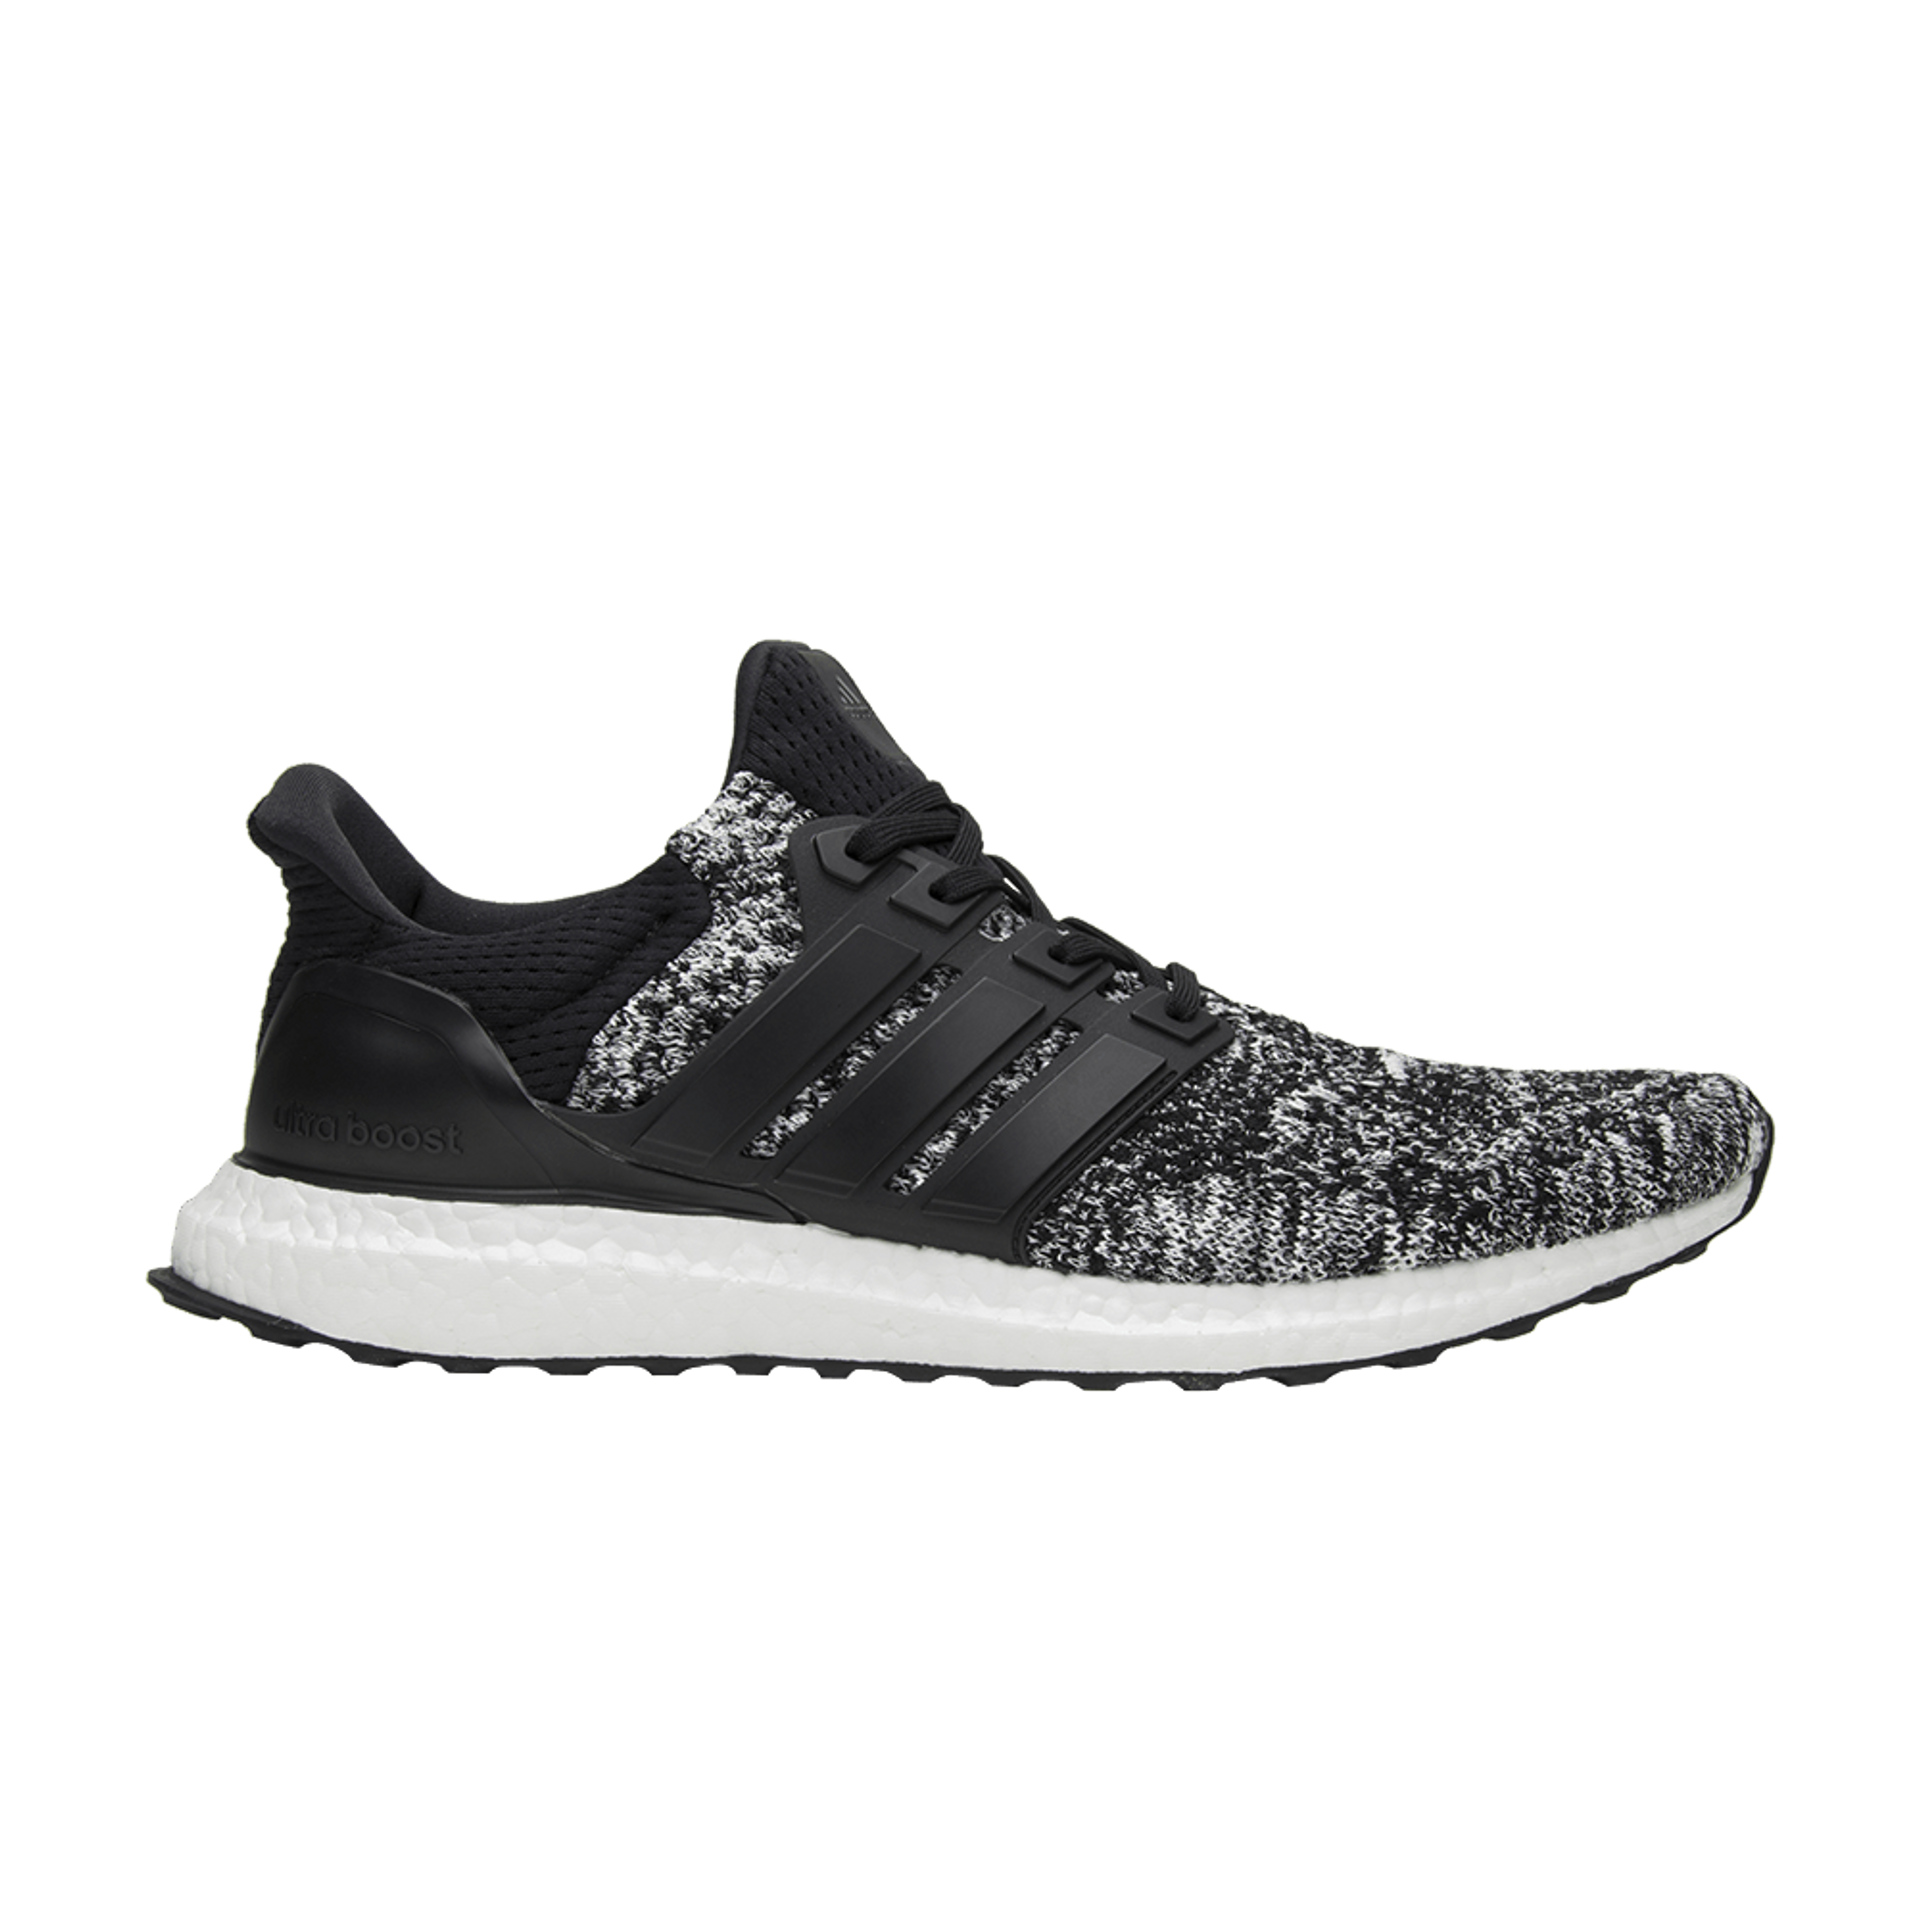 Reigning Champ x UltraBoost 1.0 'Reigning Champ'